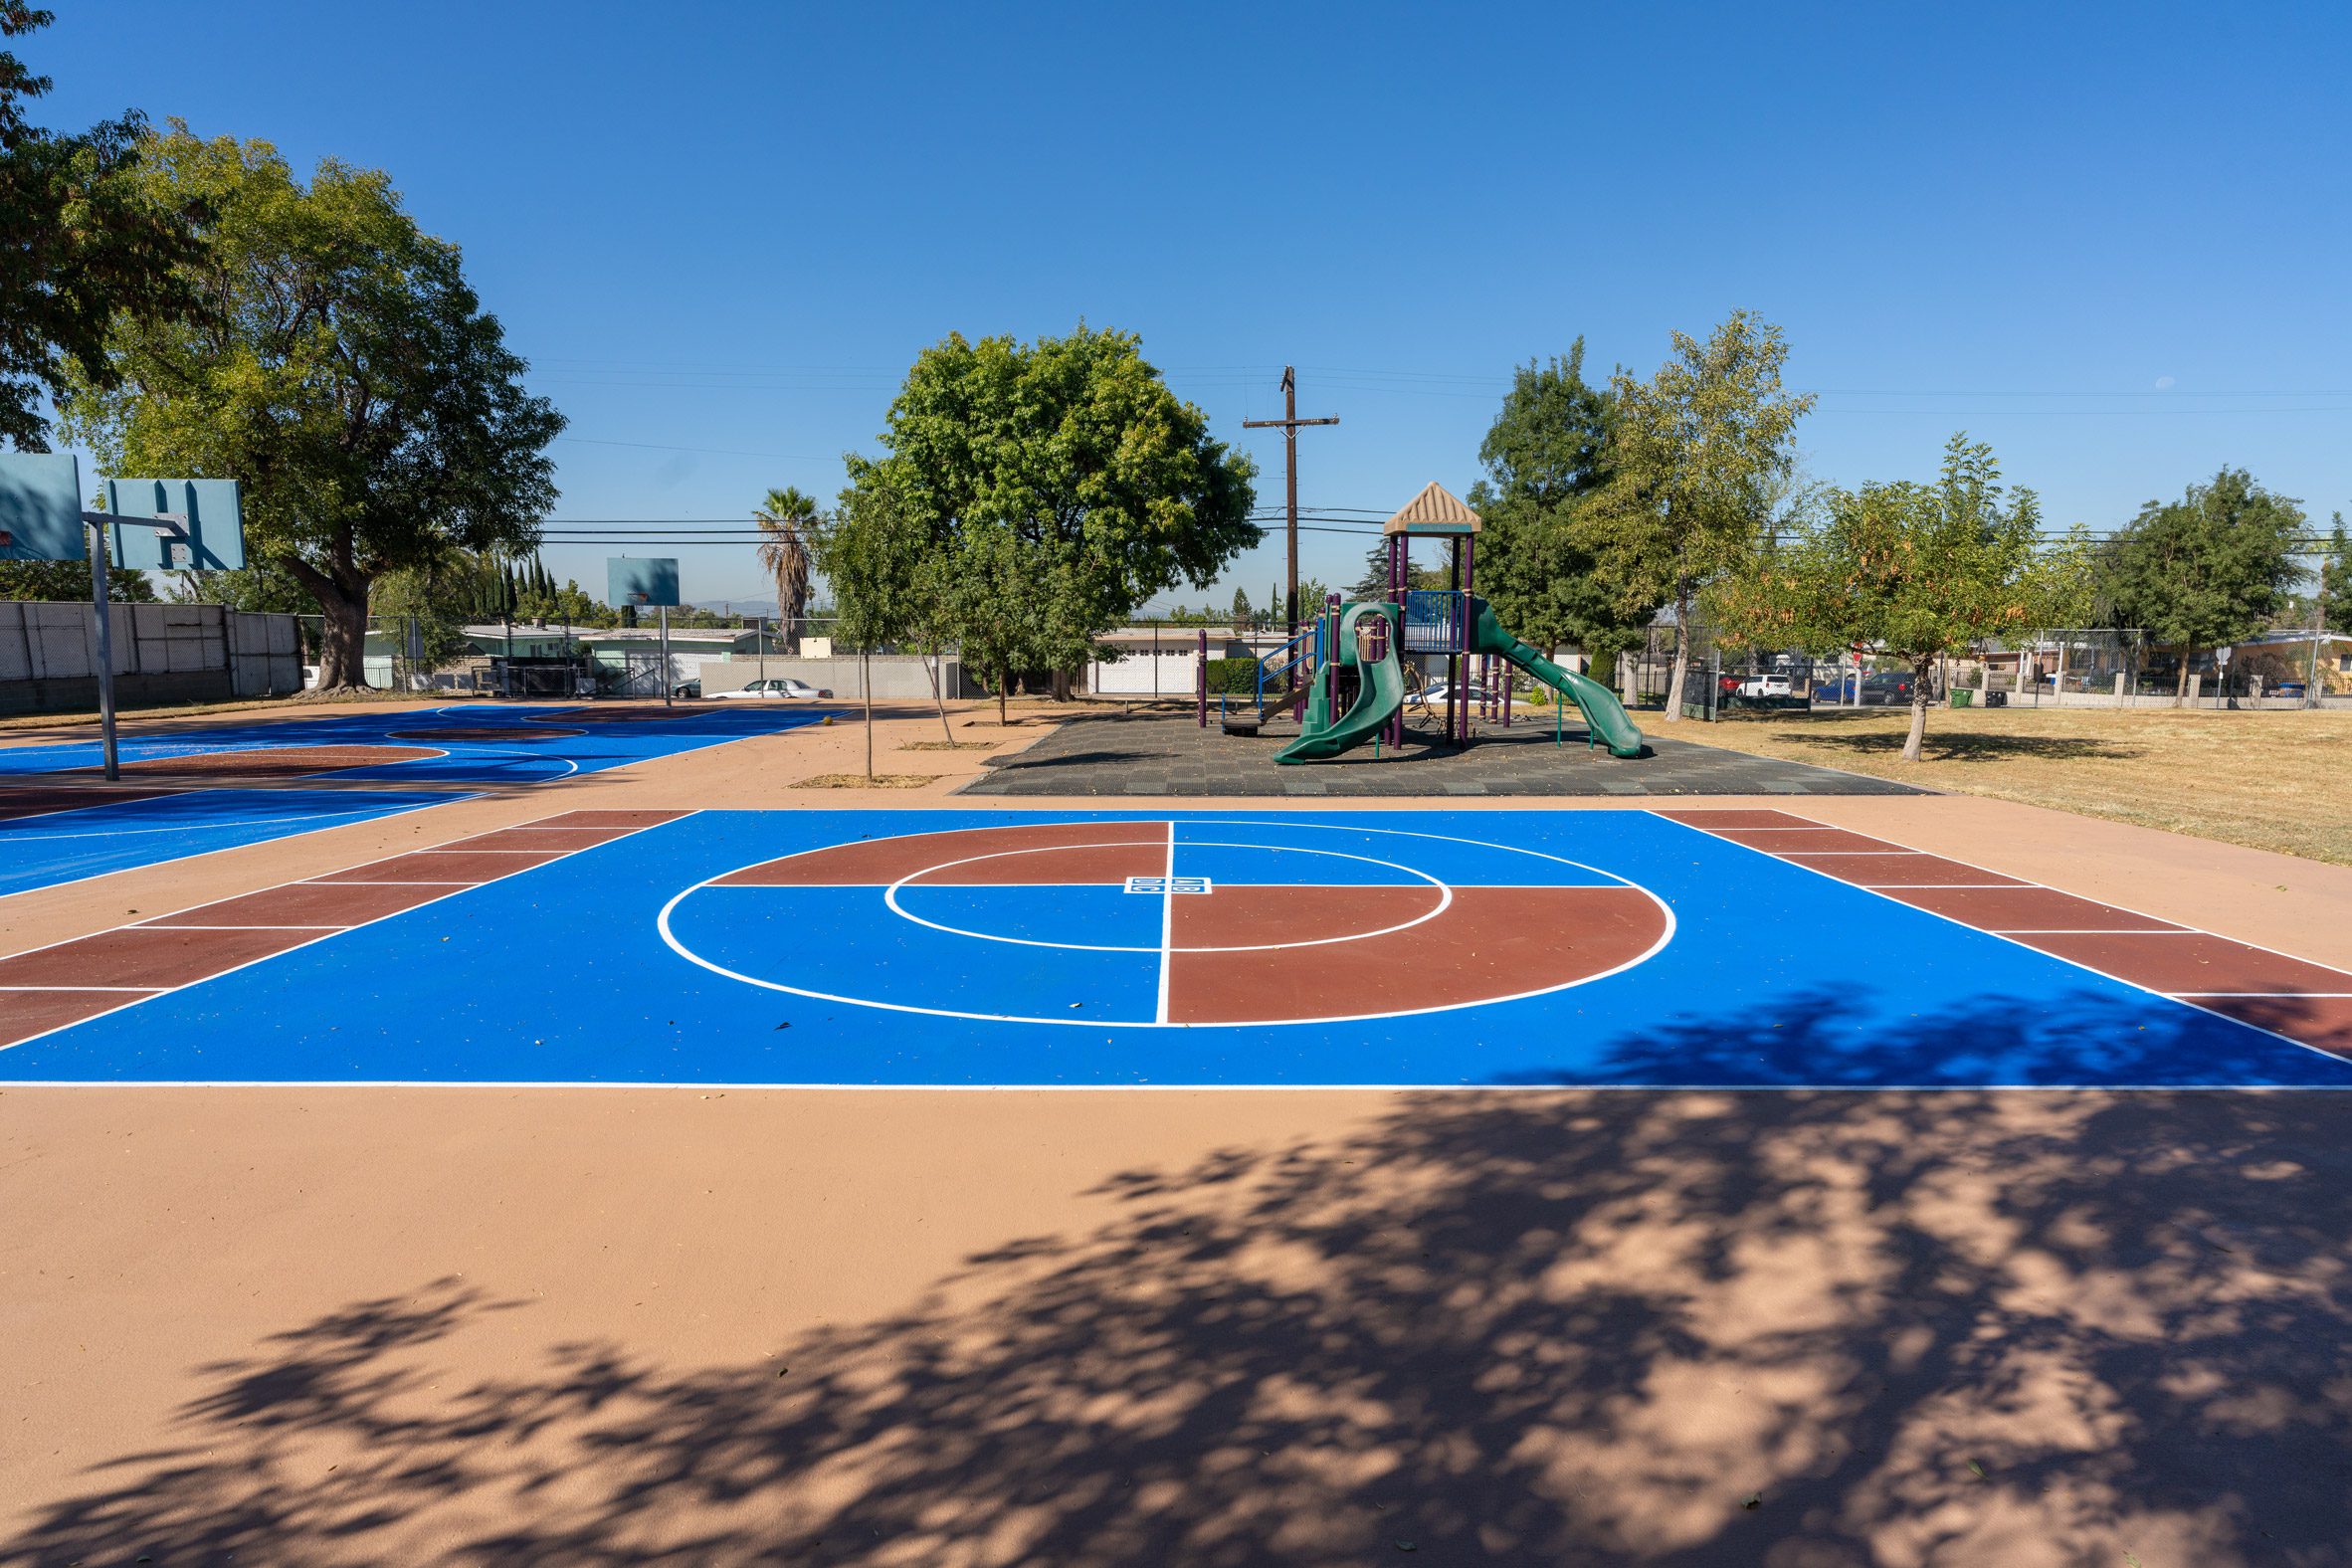 Ball court with solar reflective coating